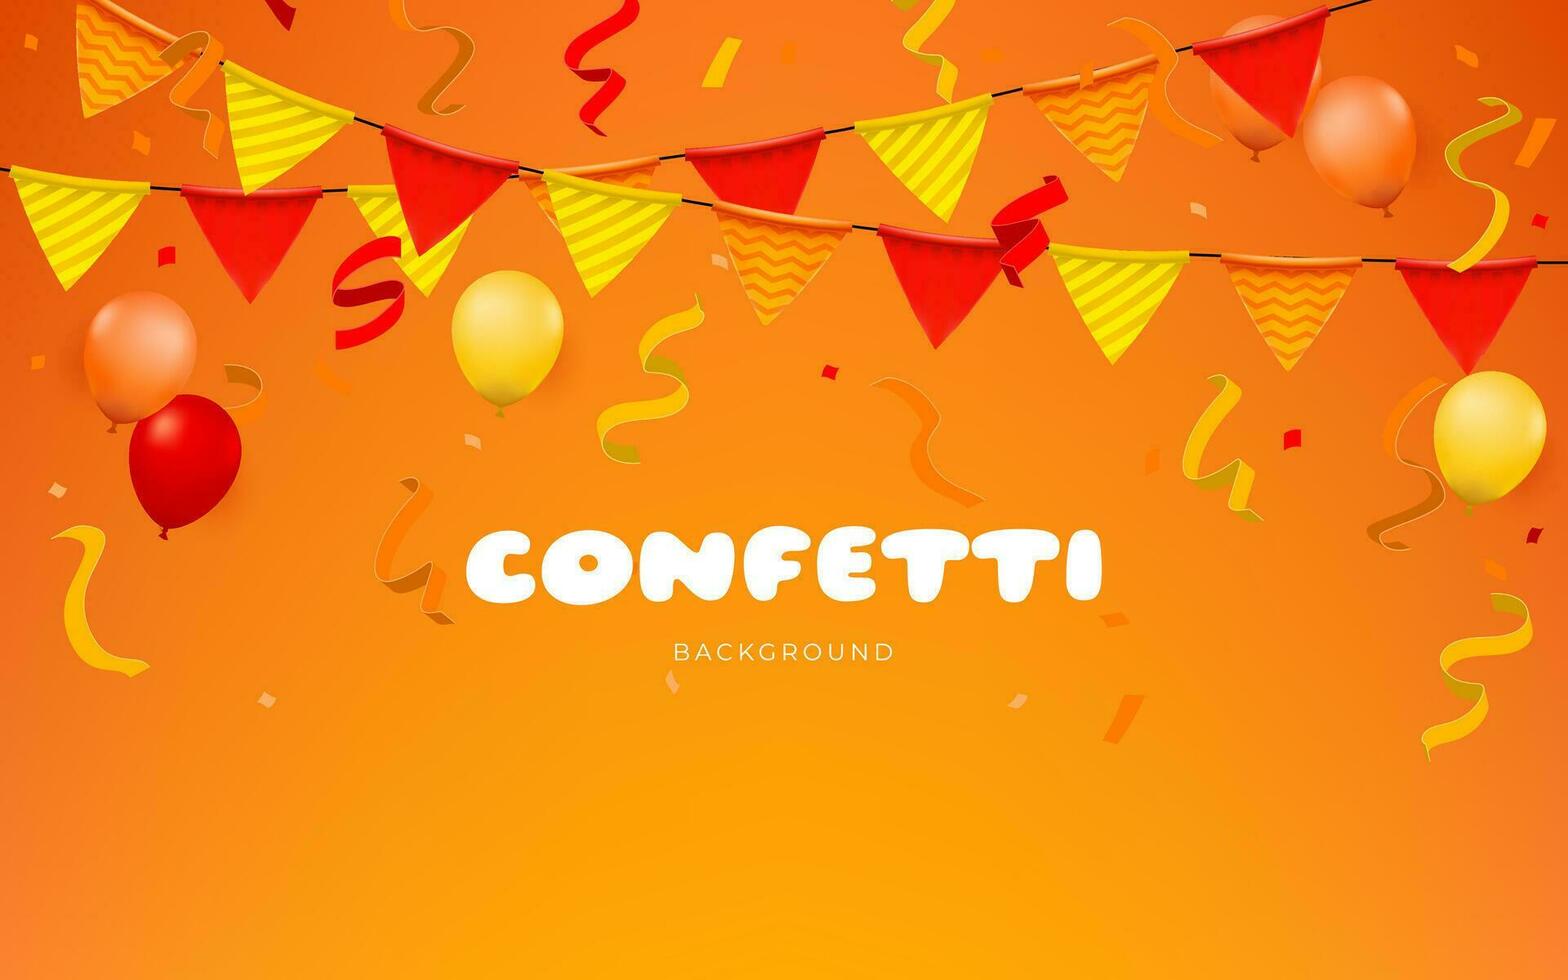 An orange banner with confetti, flags, and balloons, creating atmosphere for a happy birthday. Design perfect for birthday parties, anniversaries, or any joyful event. Not AI generated. vector